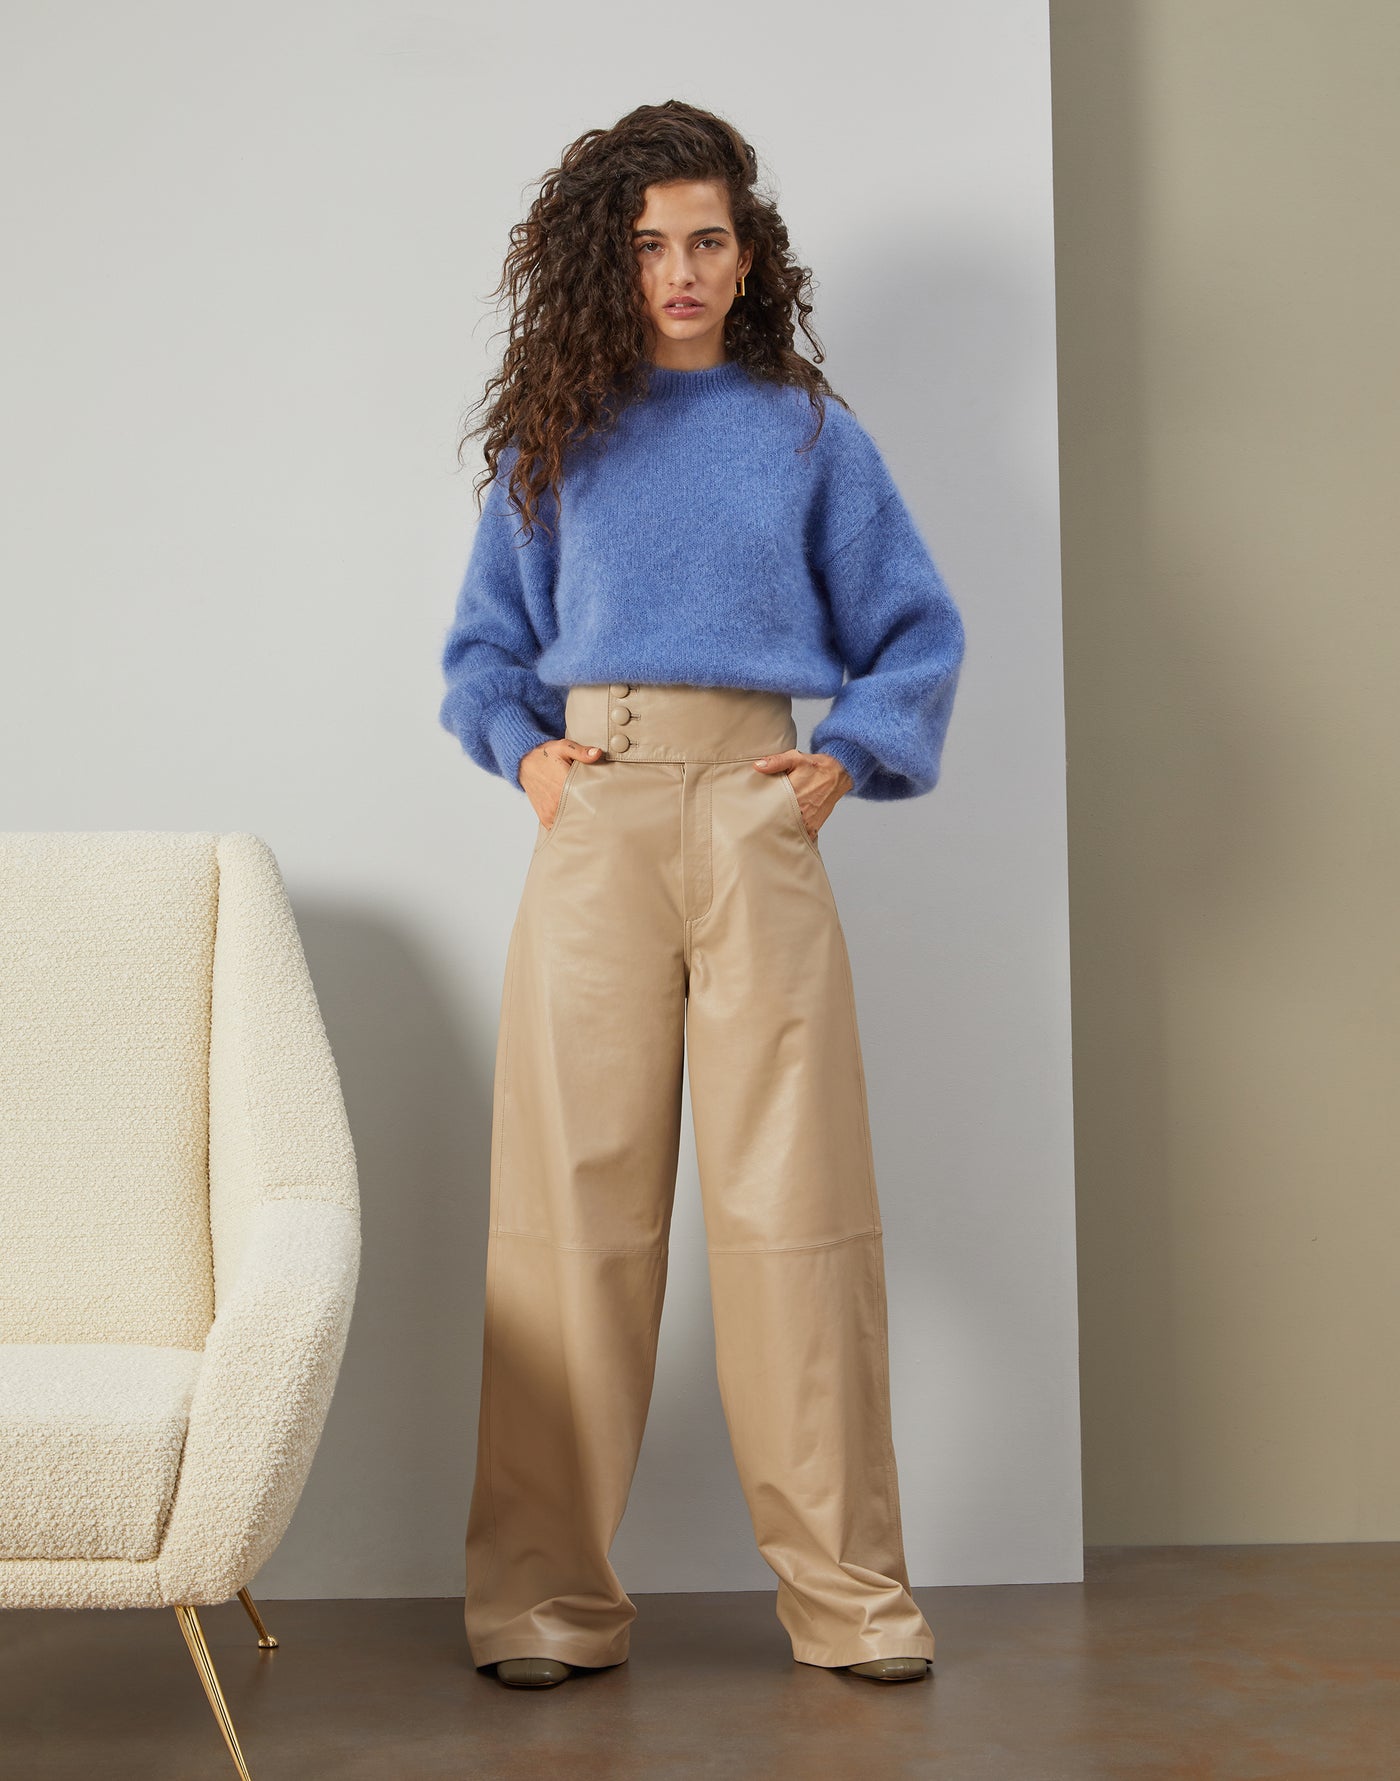 Federica Tosi - Leather Flare Trousers